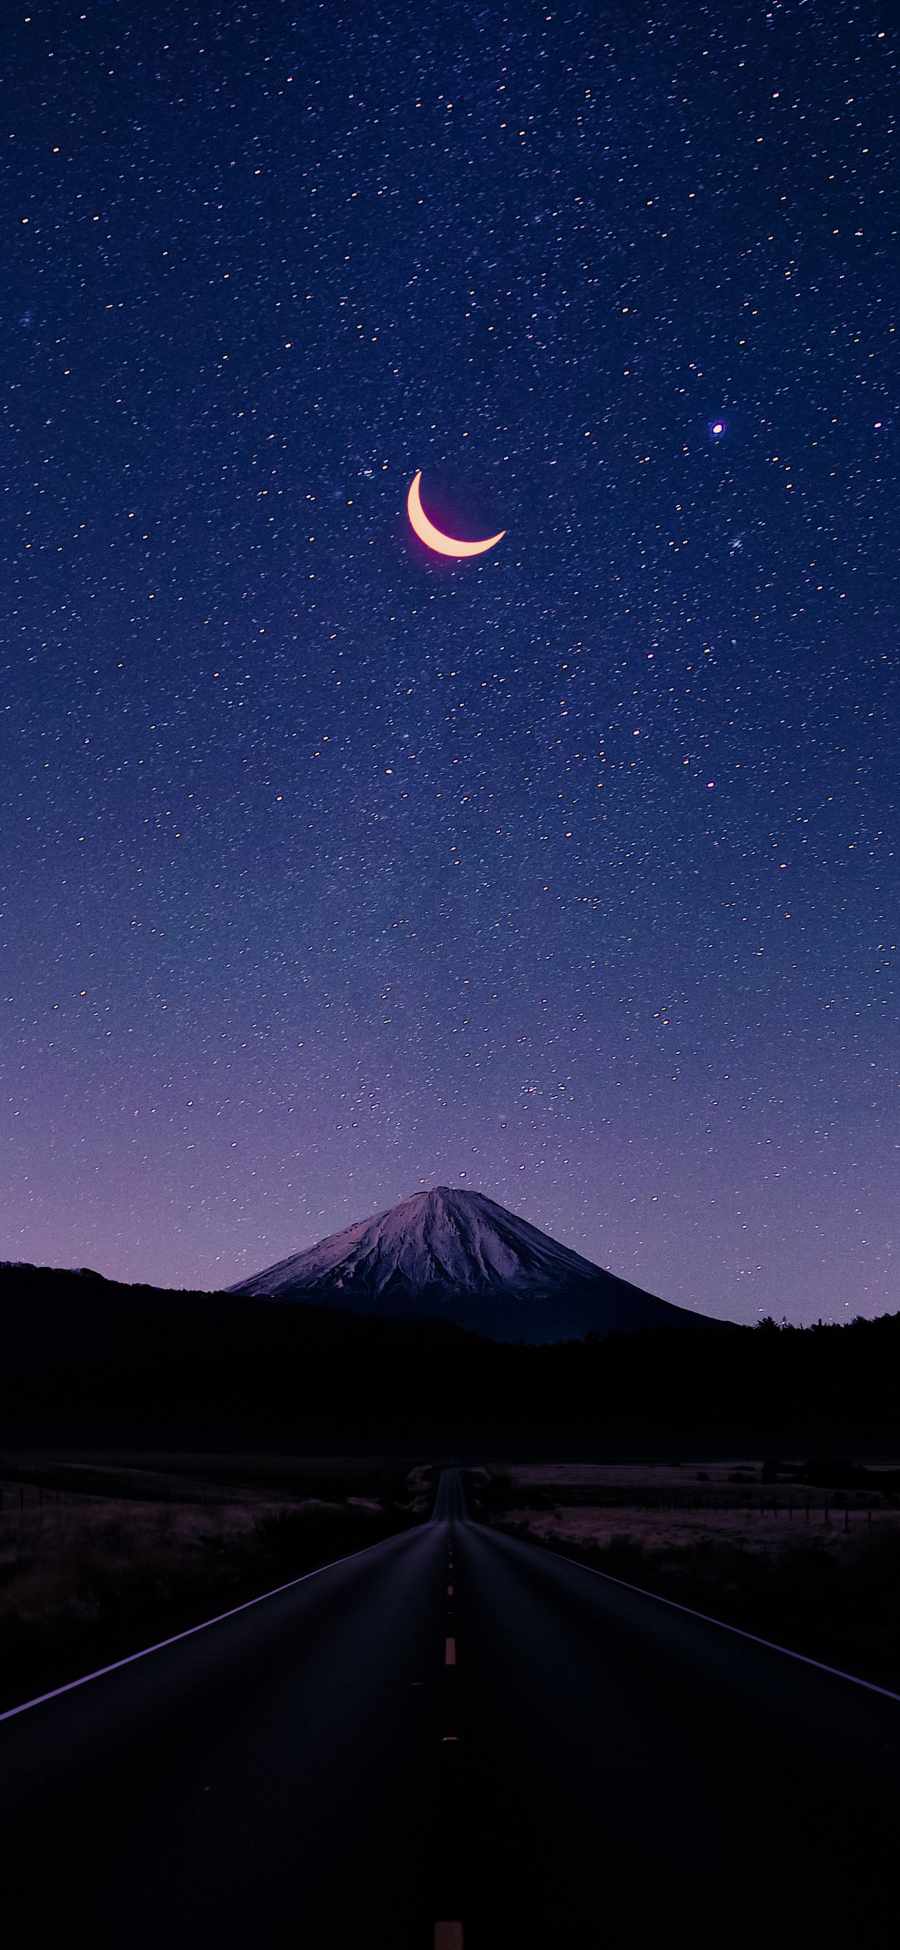 Lunay Iphone Wallpapers